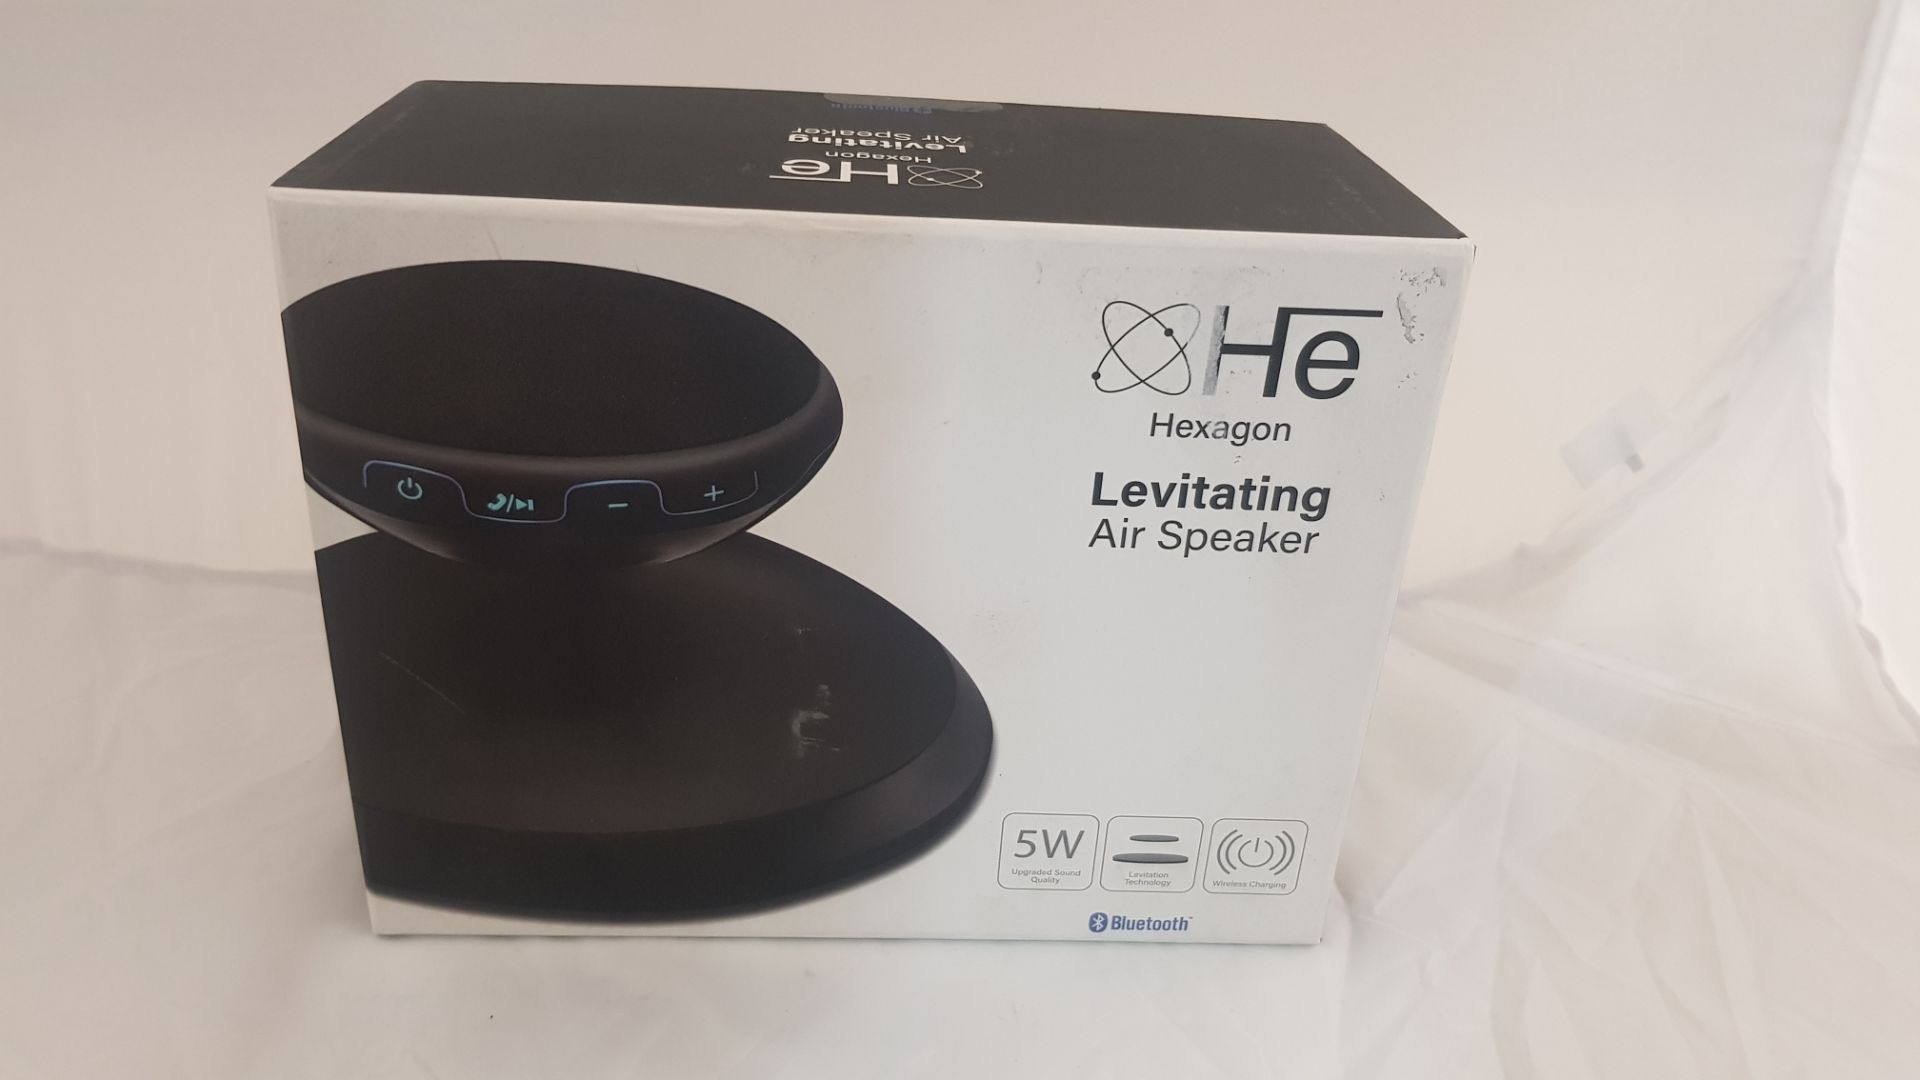 He Hexagon Levitating Air Speaker 5W. (RRP £99.99) Wireless Charging & Bluetooth. Tested Ð A... - Image 2 of 3